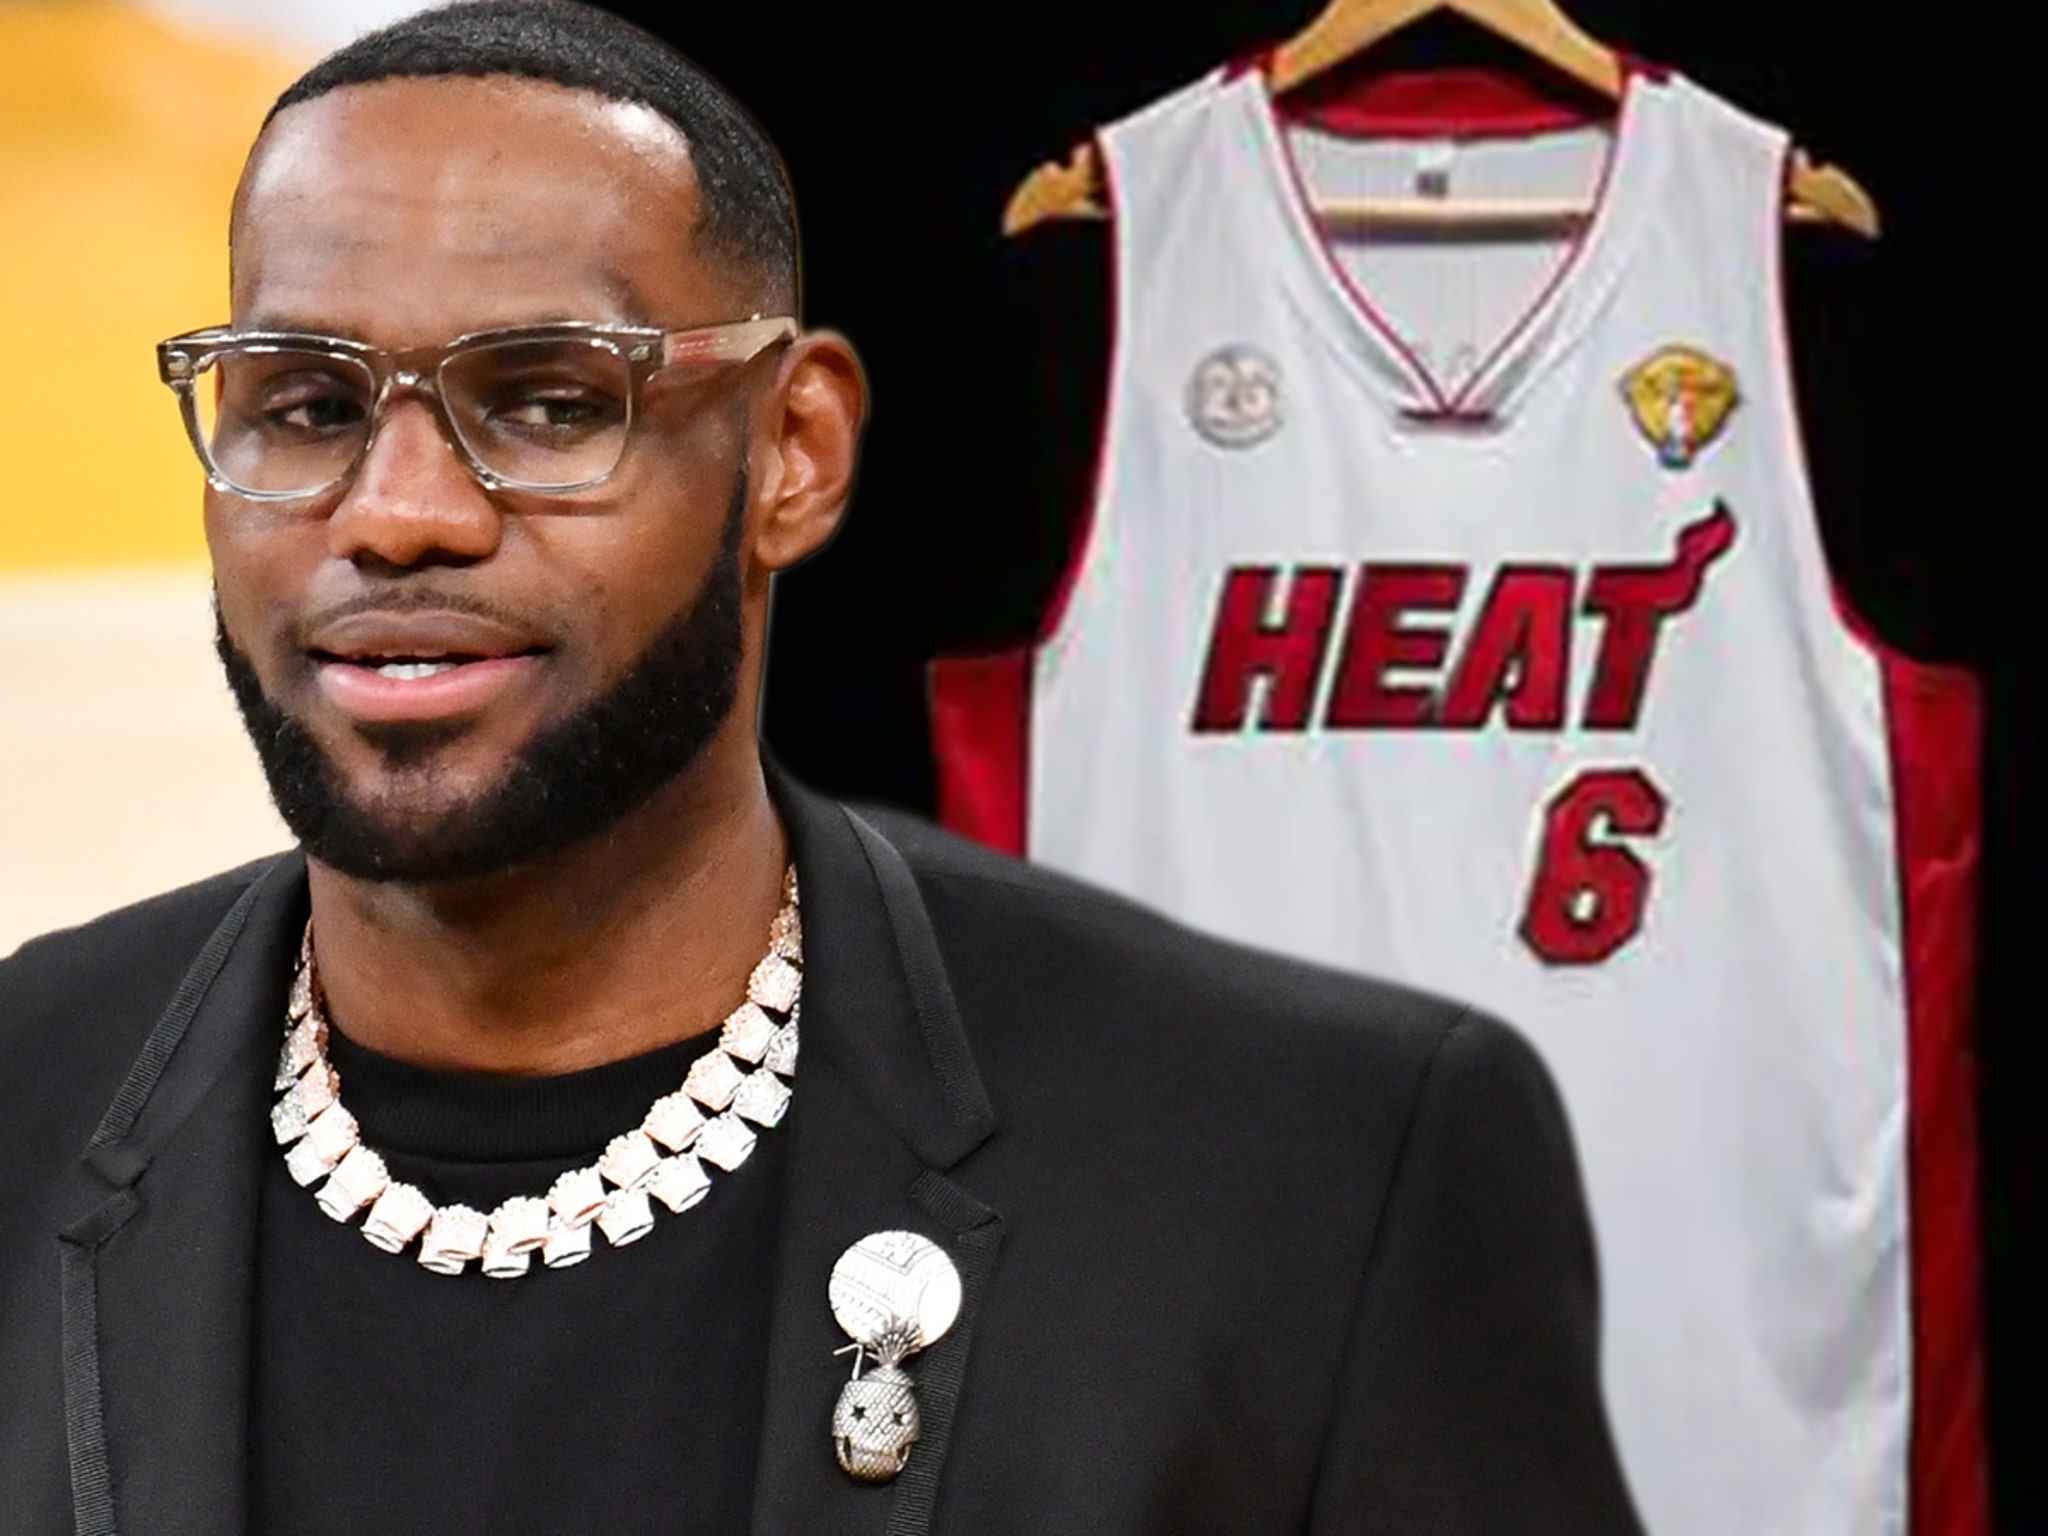 LeBron James' 2013 Finals Game 7 Jersey To Hit Auction, Could